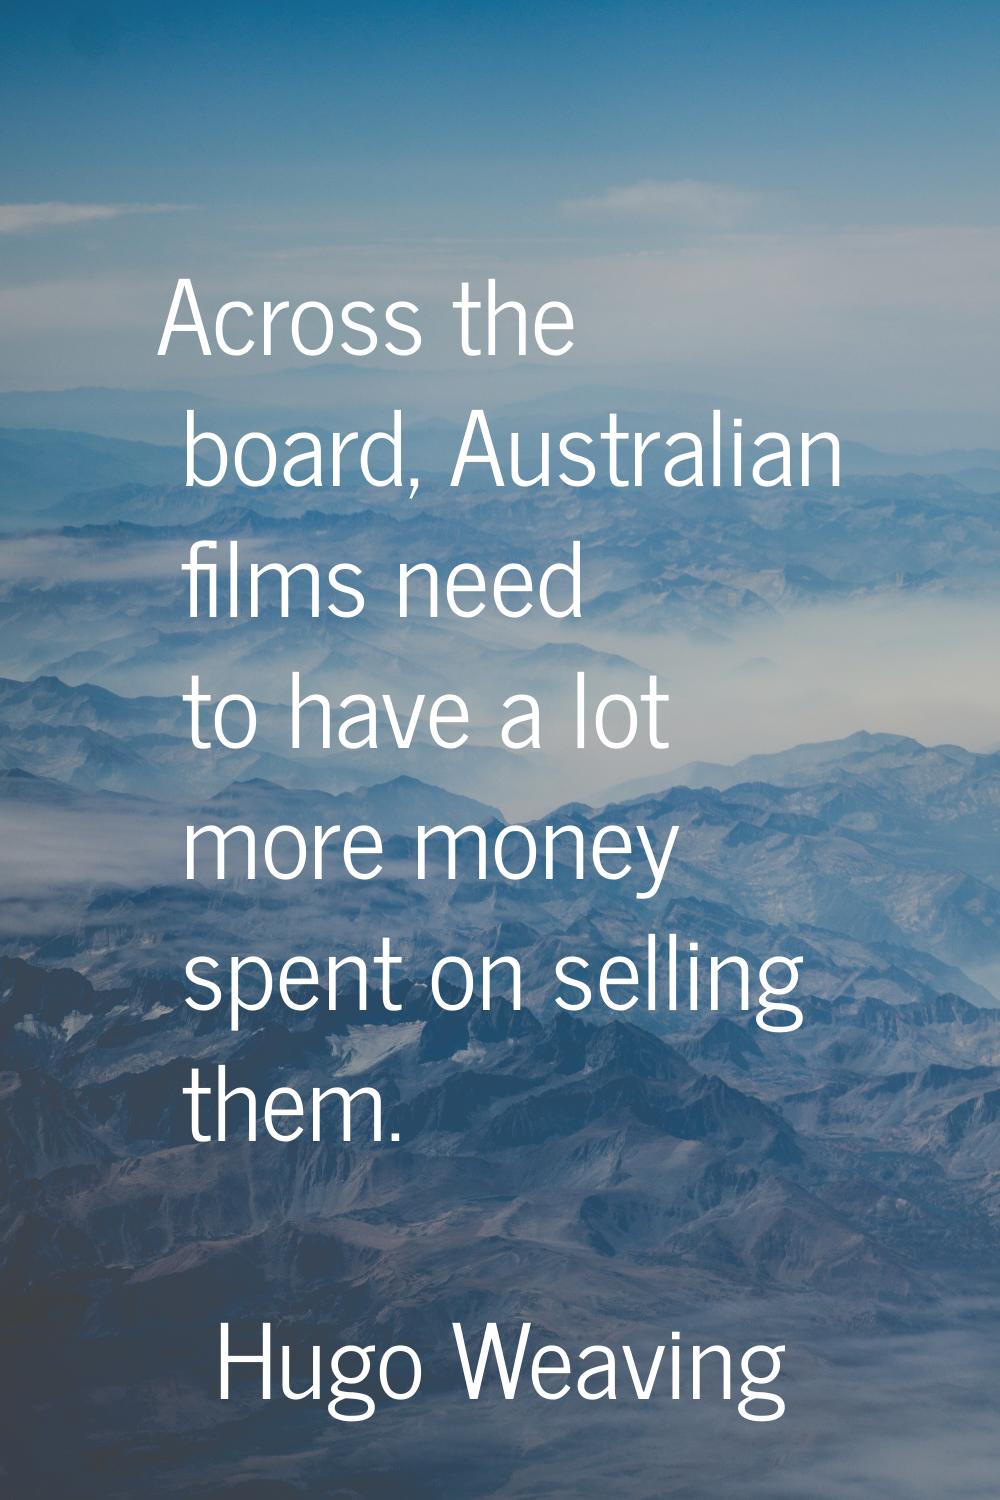 Across the board, Australian films need to have a lot more money spent on selling them.